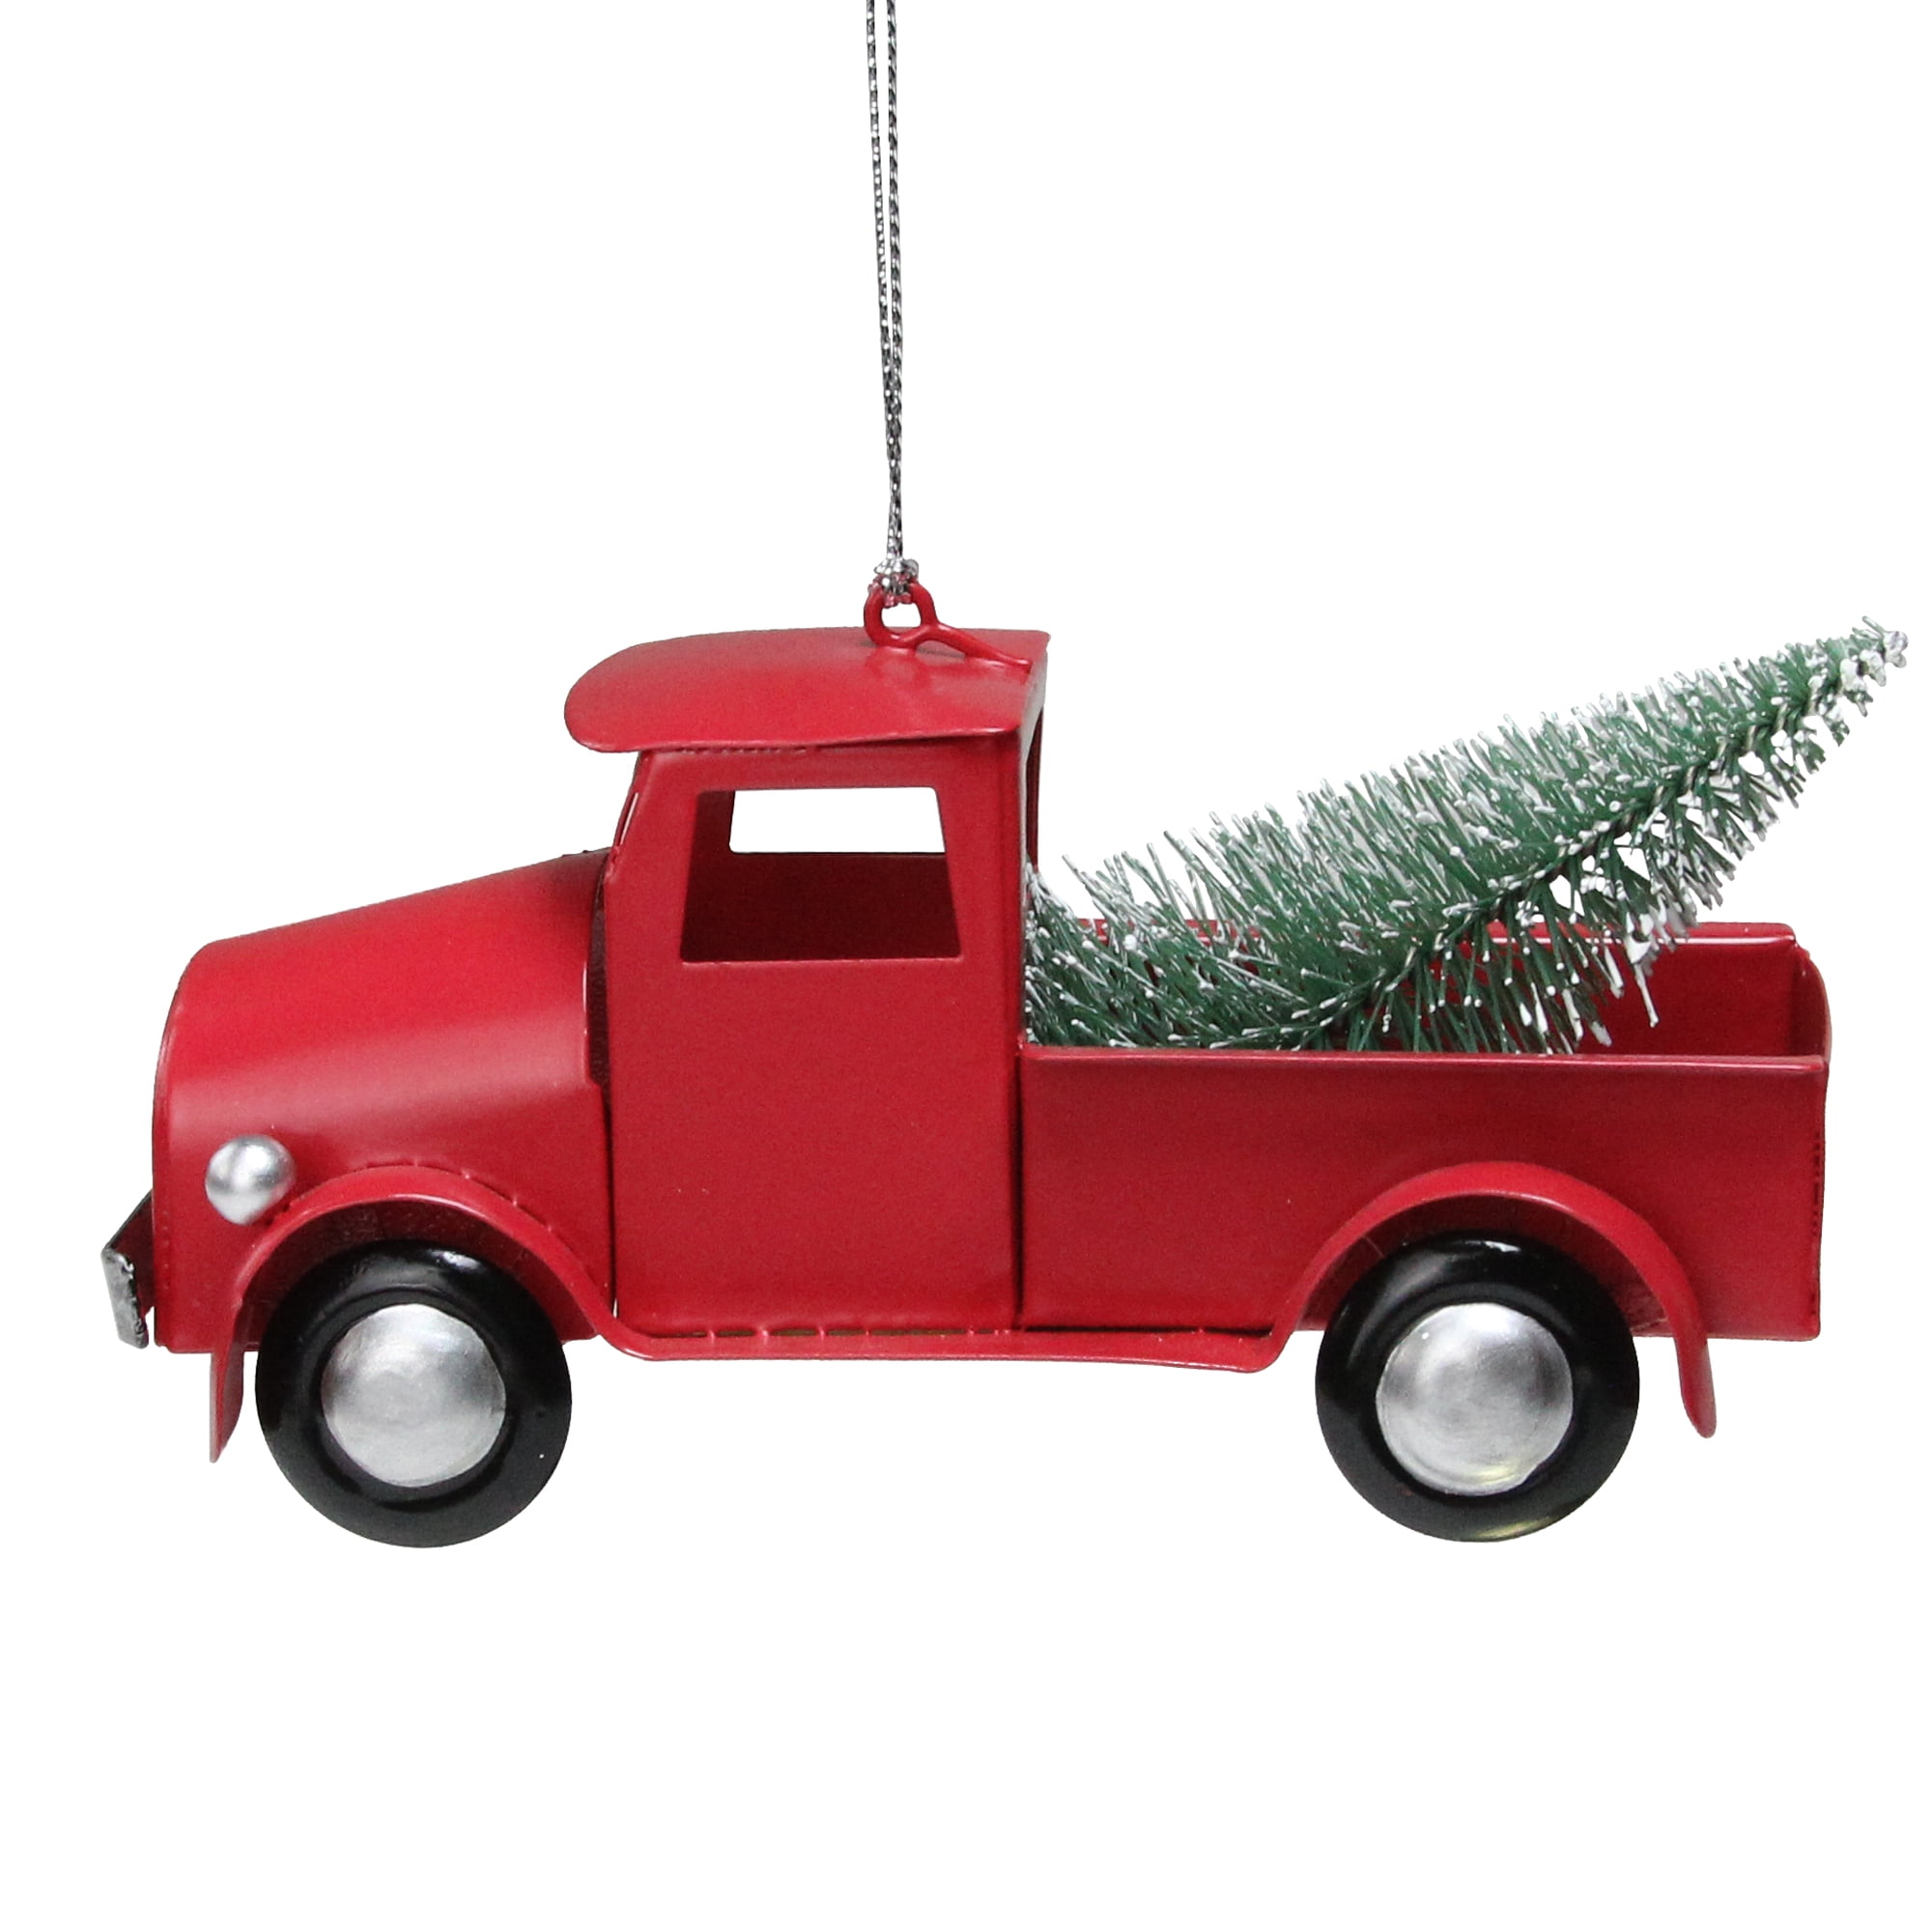 Red Farm Truck & Tree pick up Christmas Ornament Vintage Nostalgia Wood New 